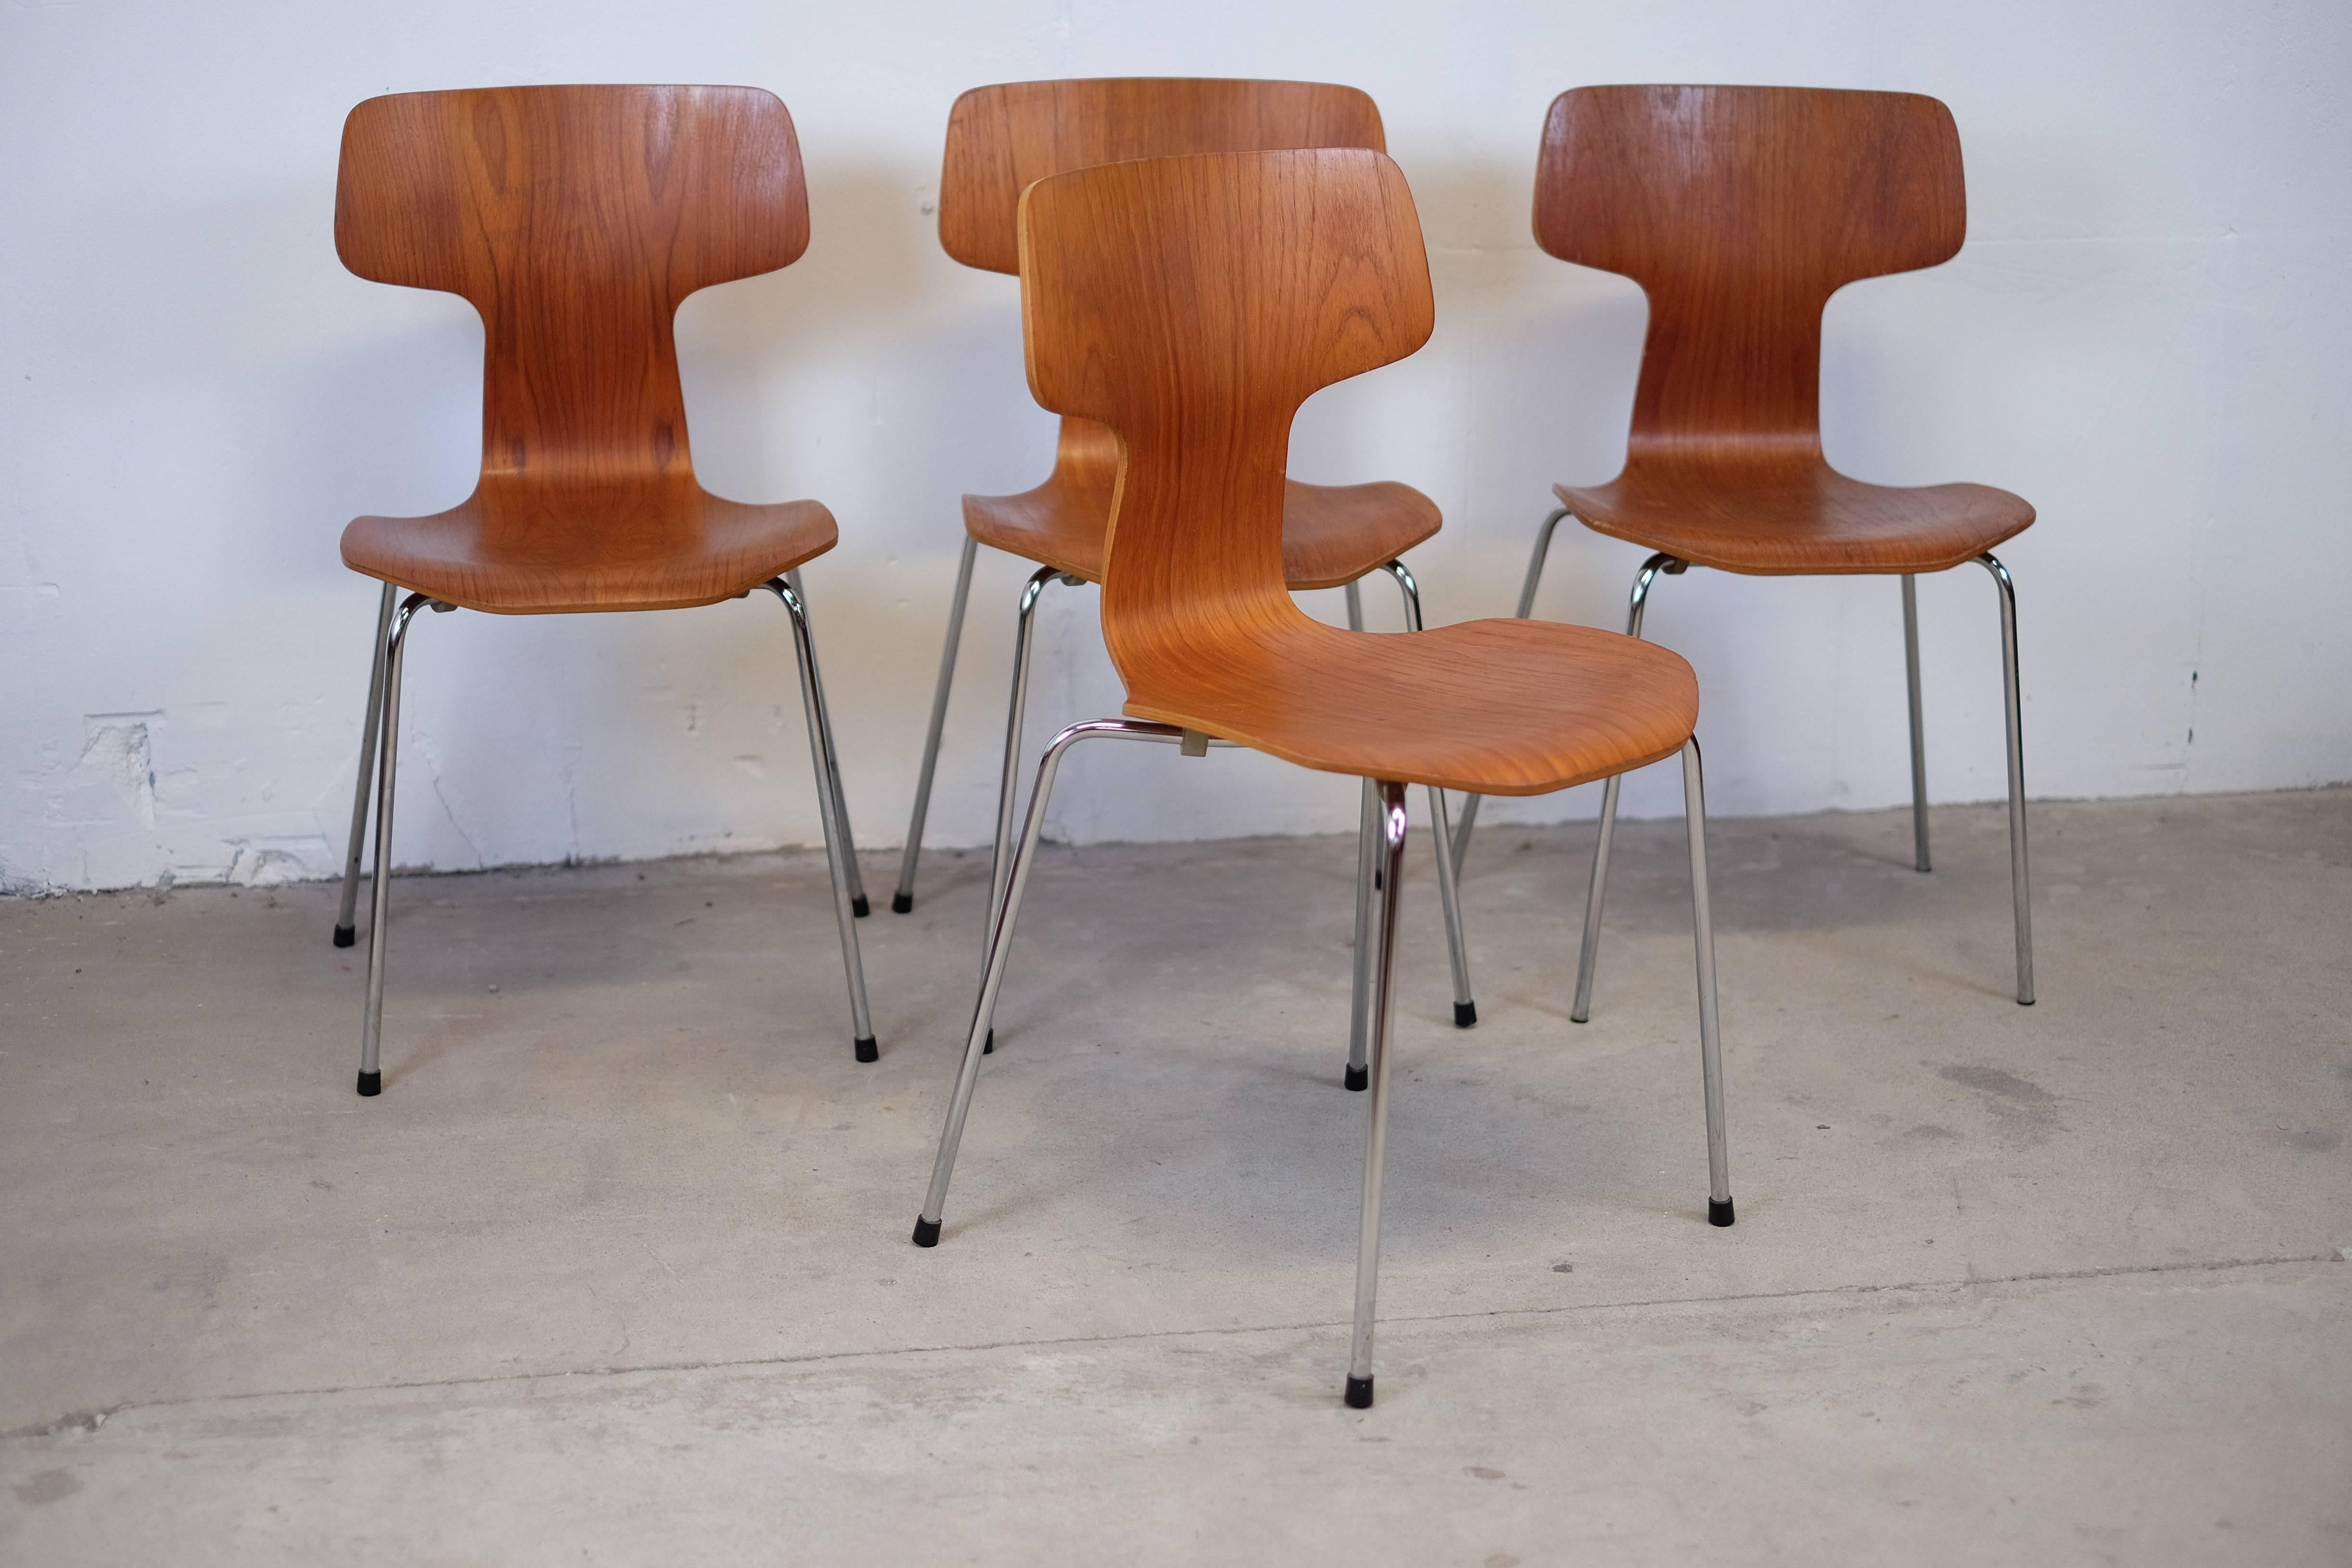 Set of four dining chairs in Teak 'Hammer' chair by Arne Jacobsen for Fritz Hansen, 1960s.

These chairs got a great shape and are very comfortable. 

The chairs has some small marks due age-related use, but they are in good vintage condition.